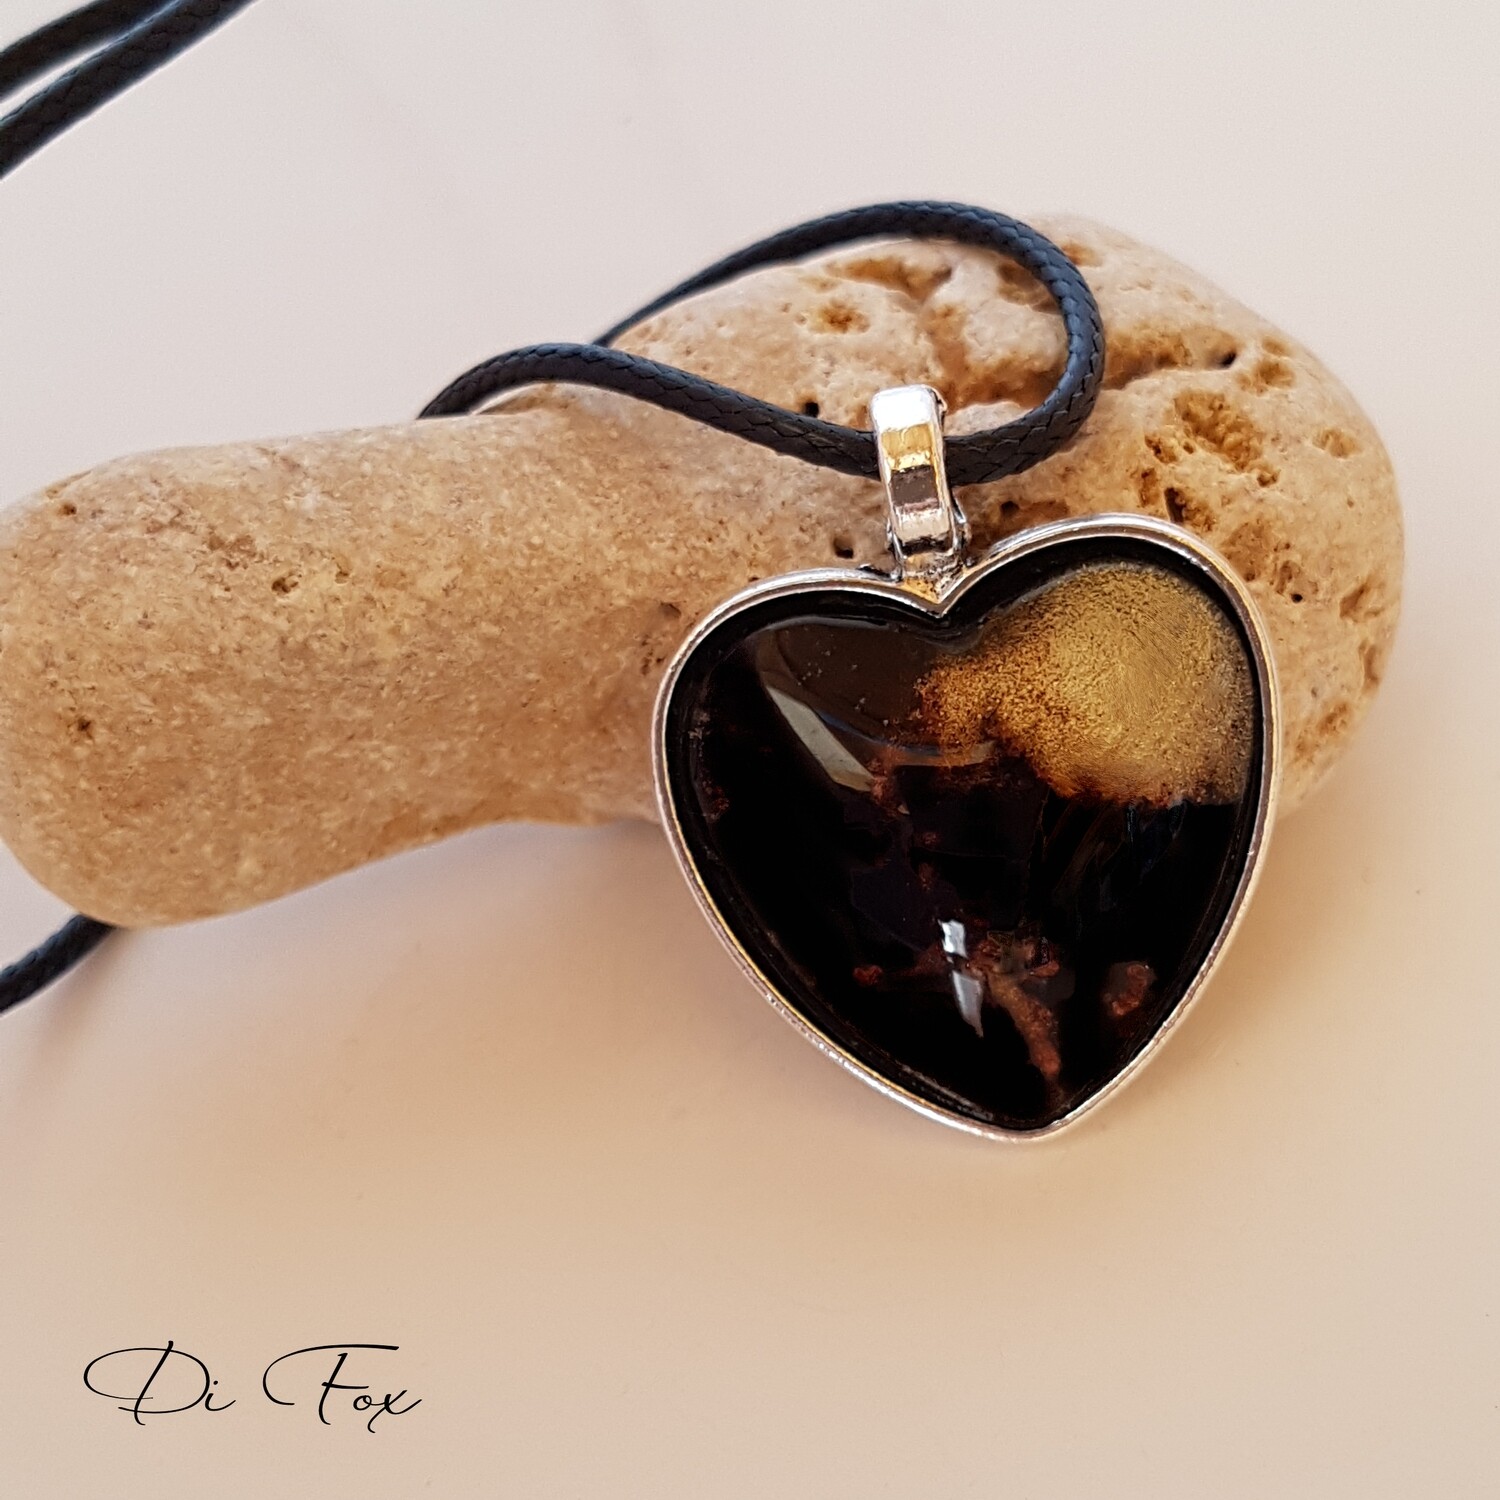 Black and Gold Heart shape pendant necklace